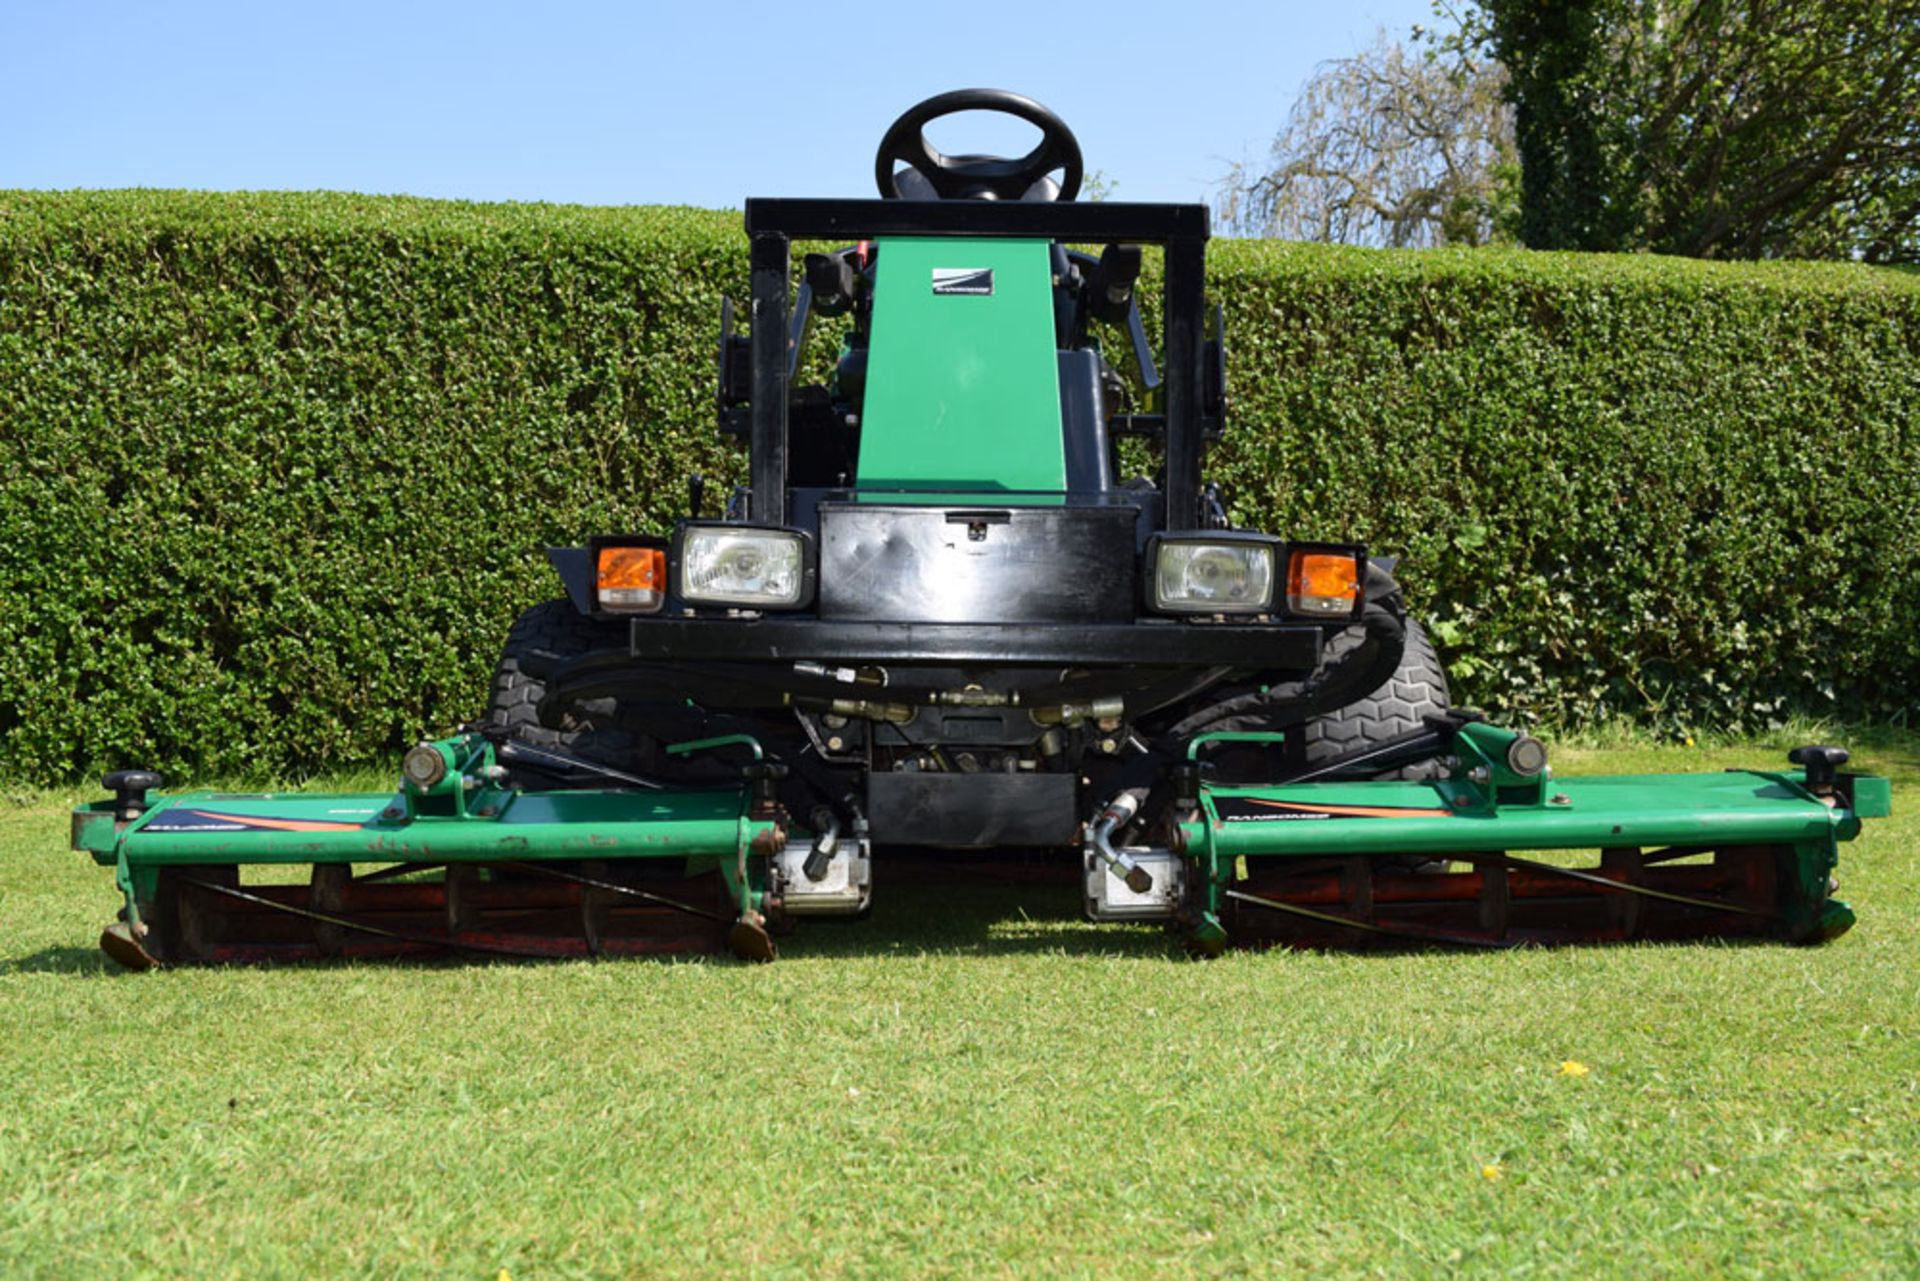 2006 Ransomes Highway 2130 4WD Cylinder Mower